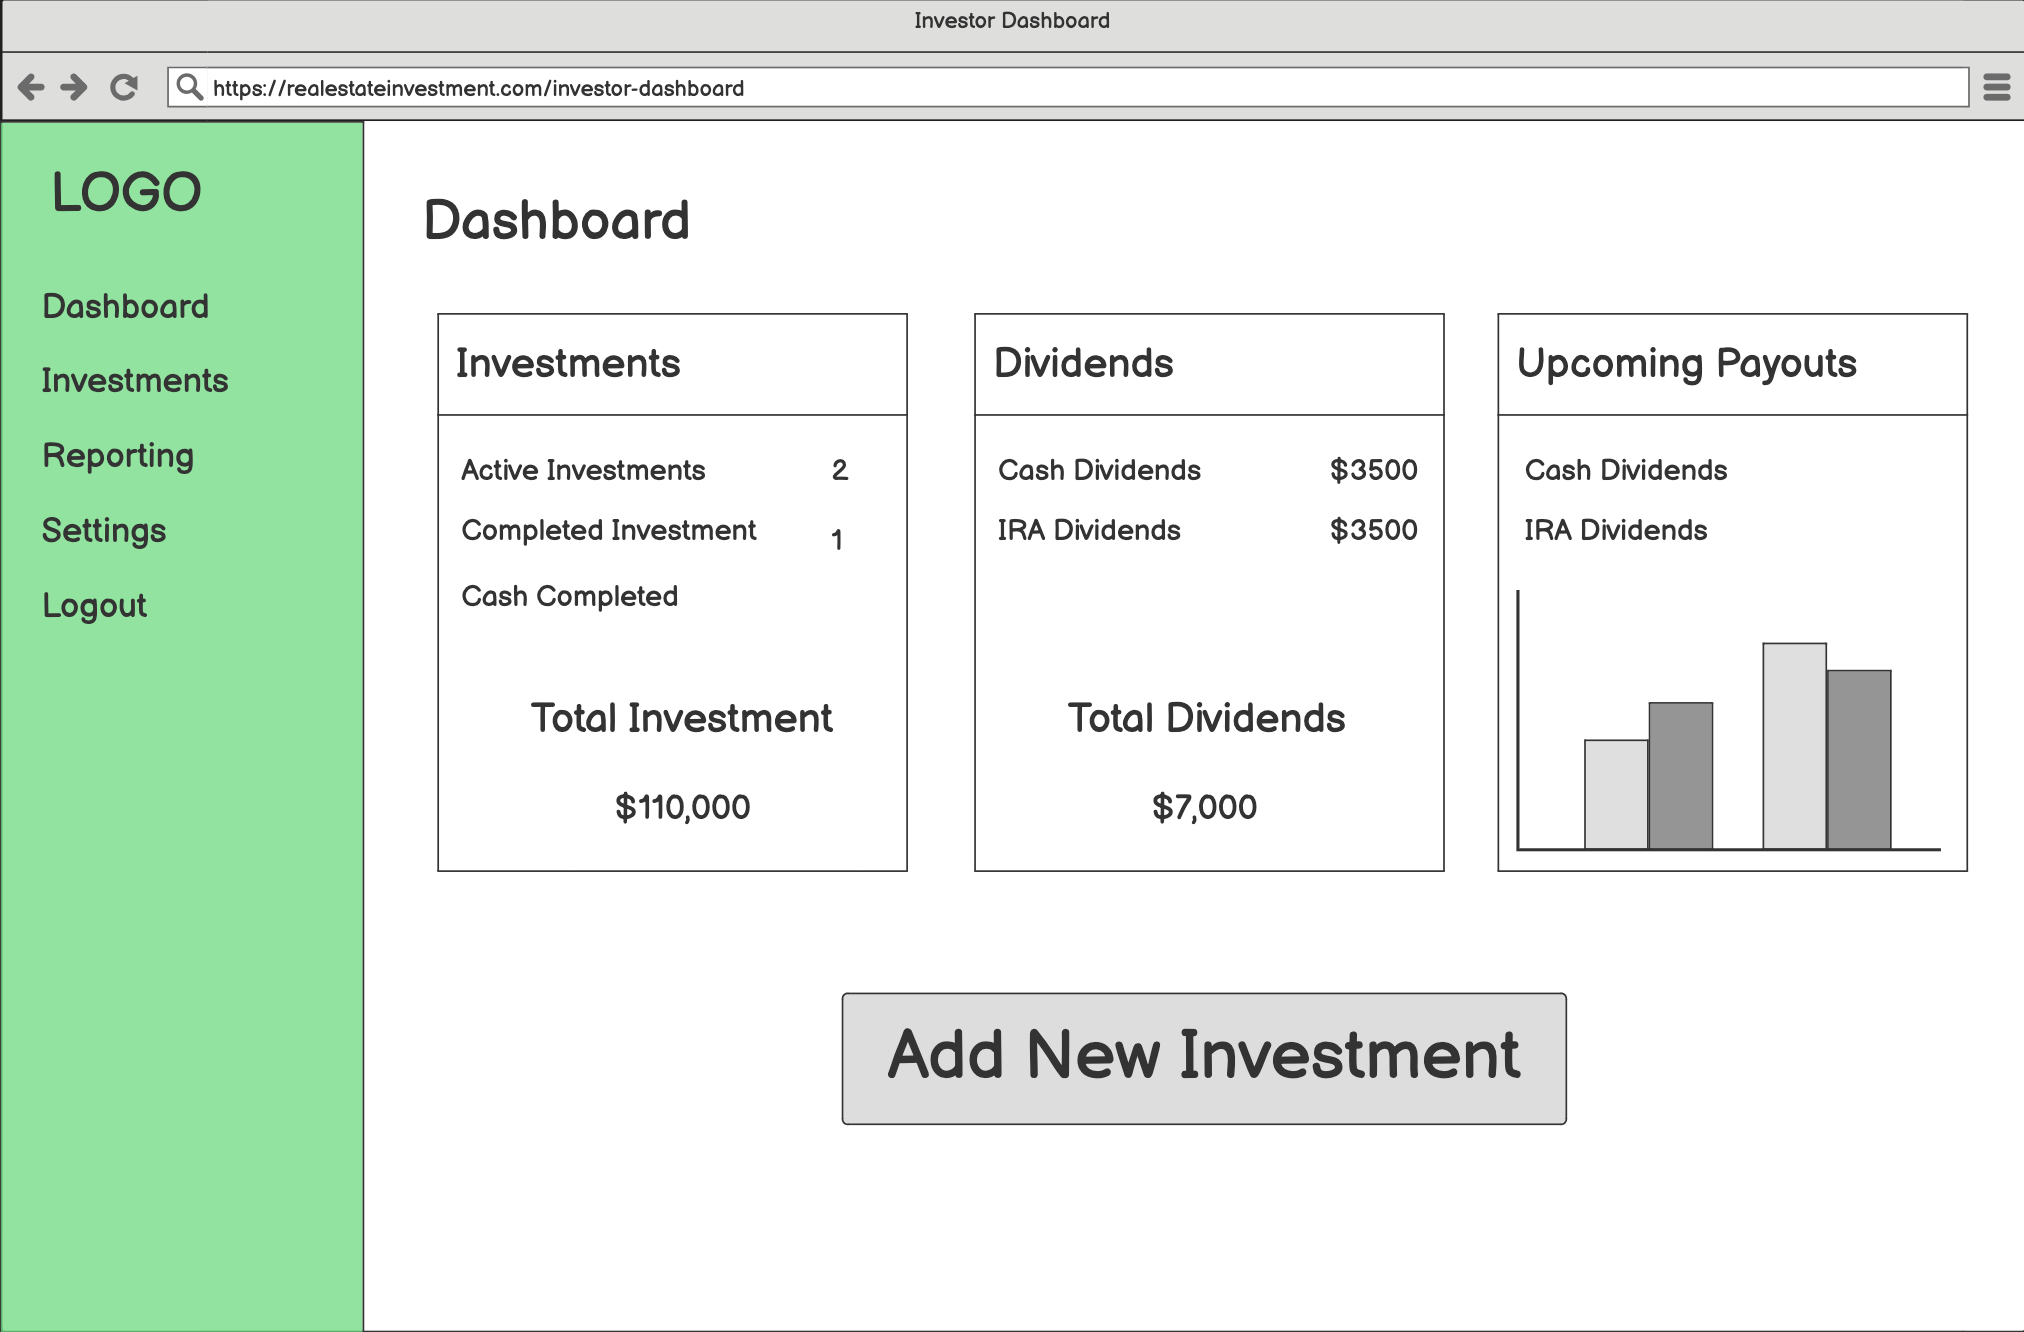 Private equity investor dashbord